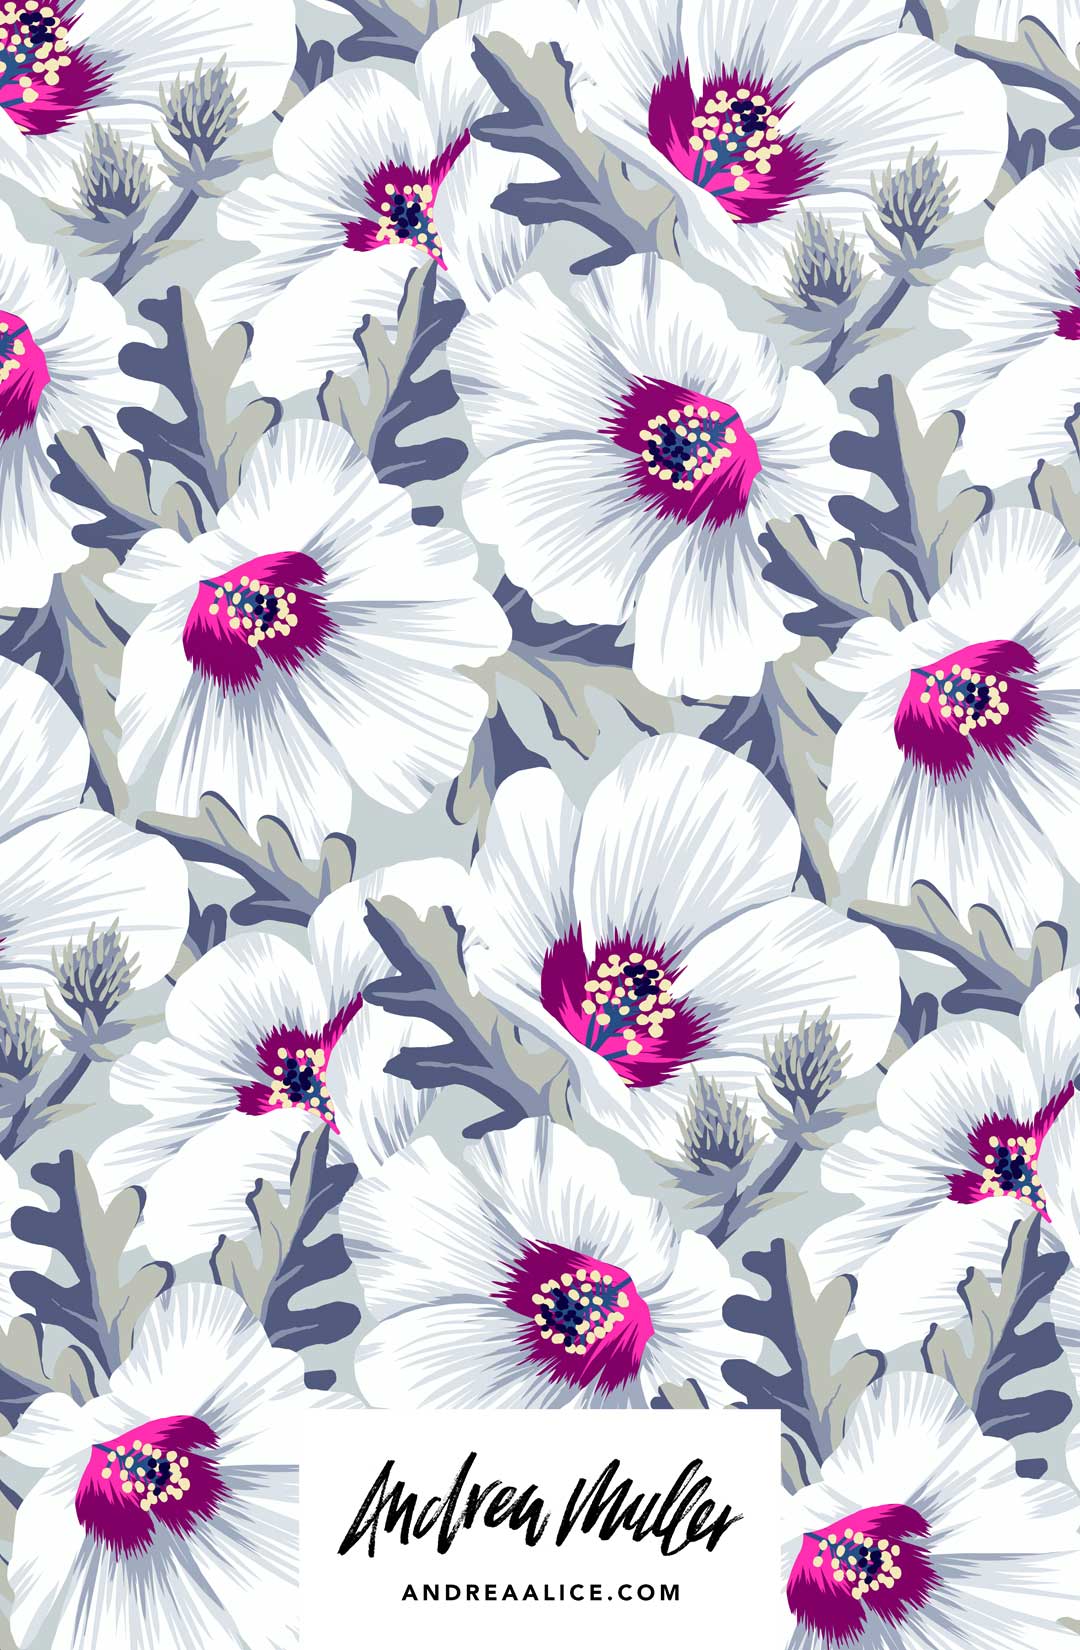 New Zealand Hibiscus light vector floral pattern by Andrea Muller